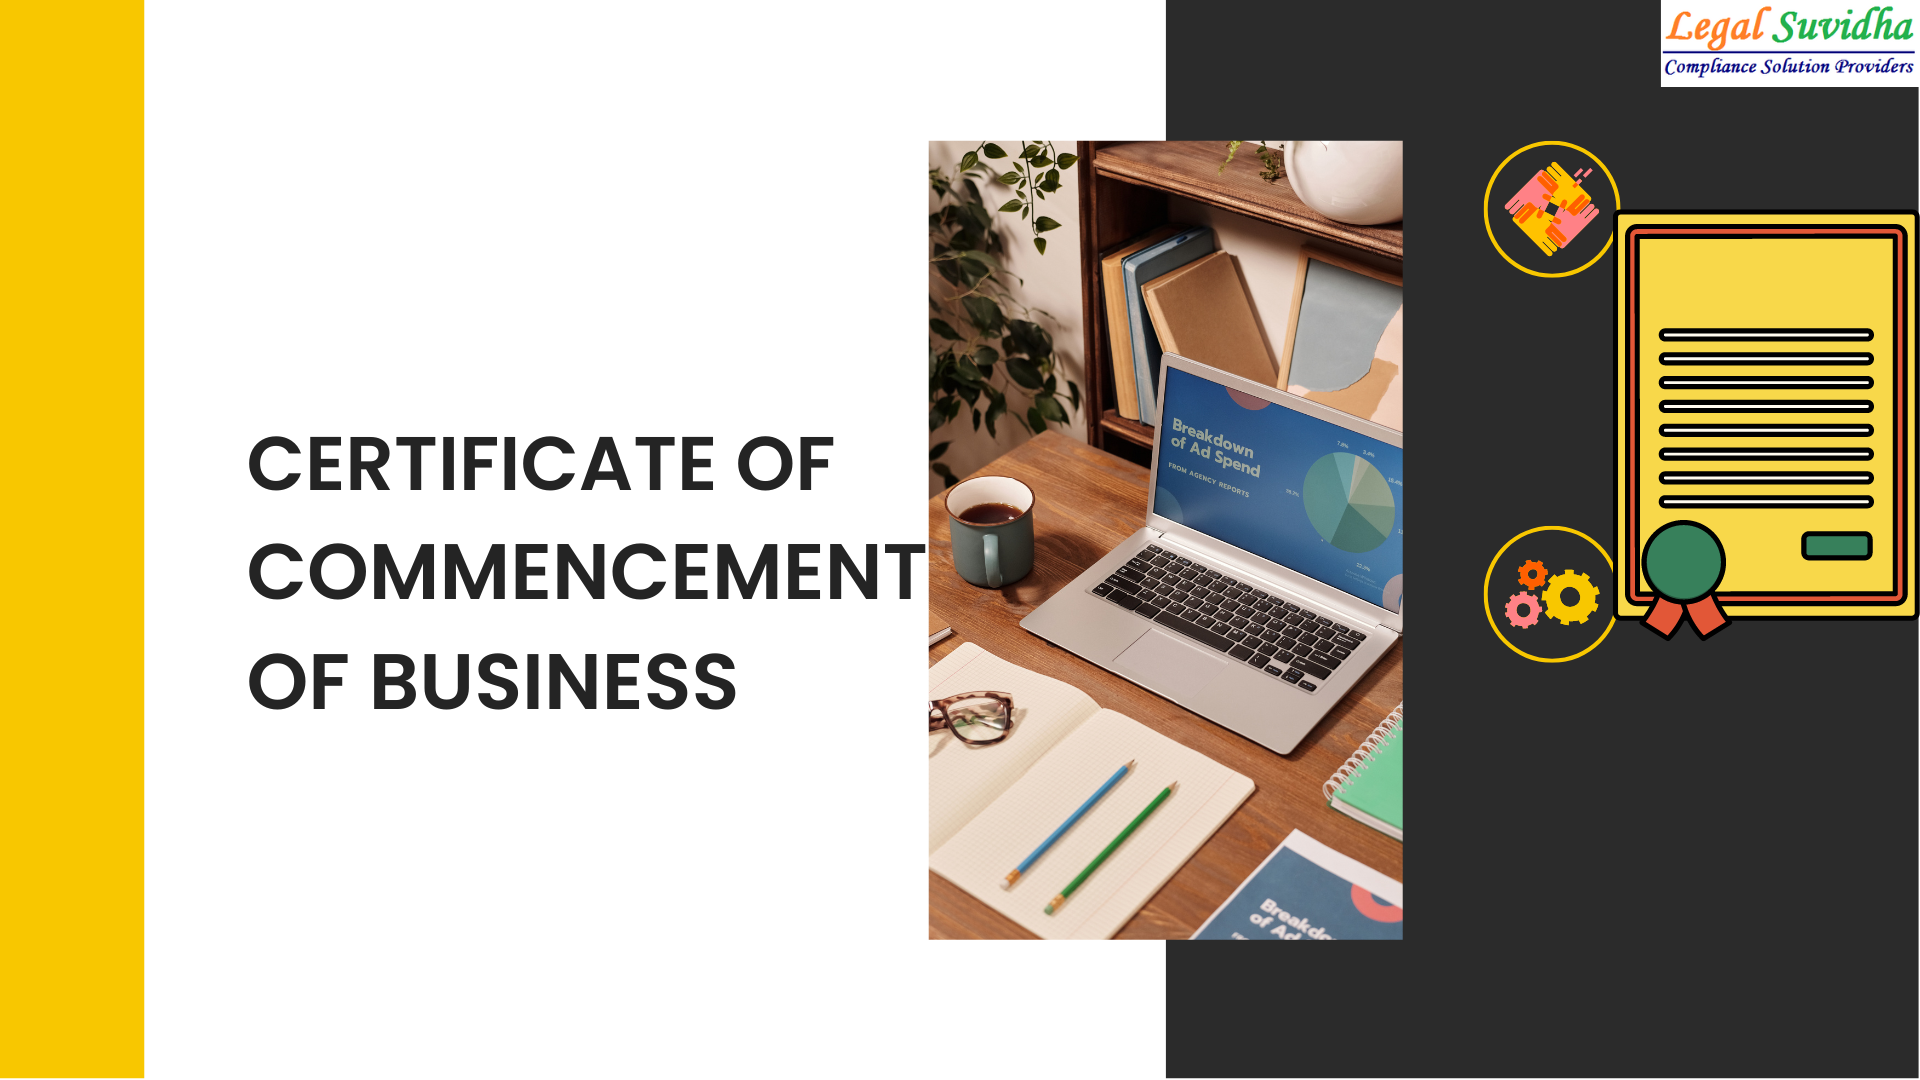 Certificate of Commencement of Business